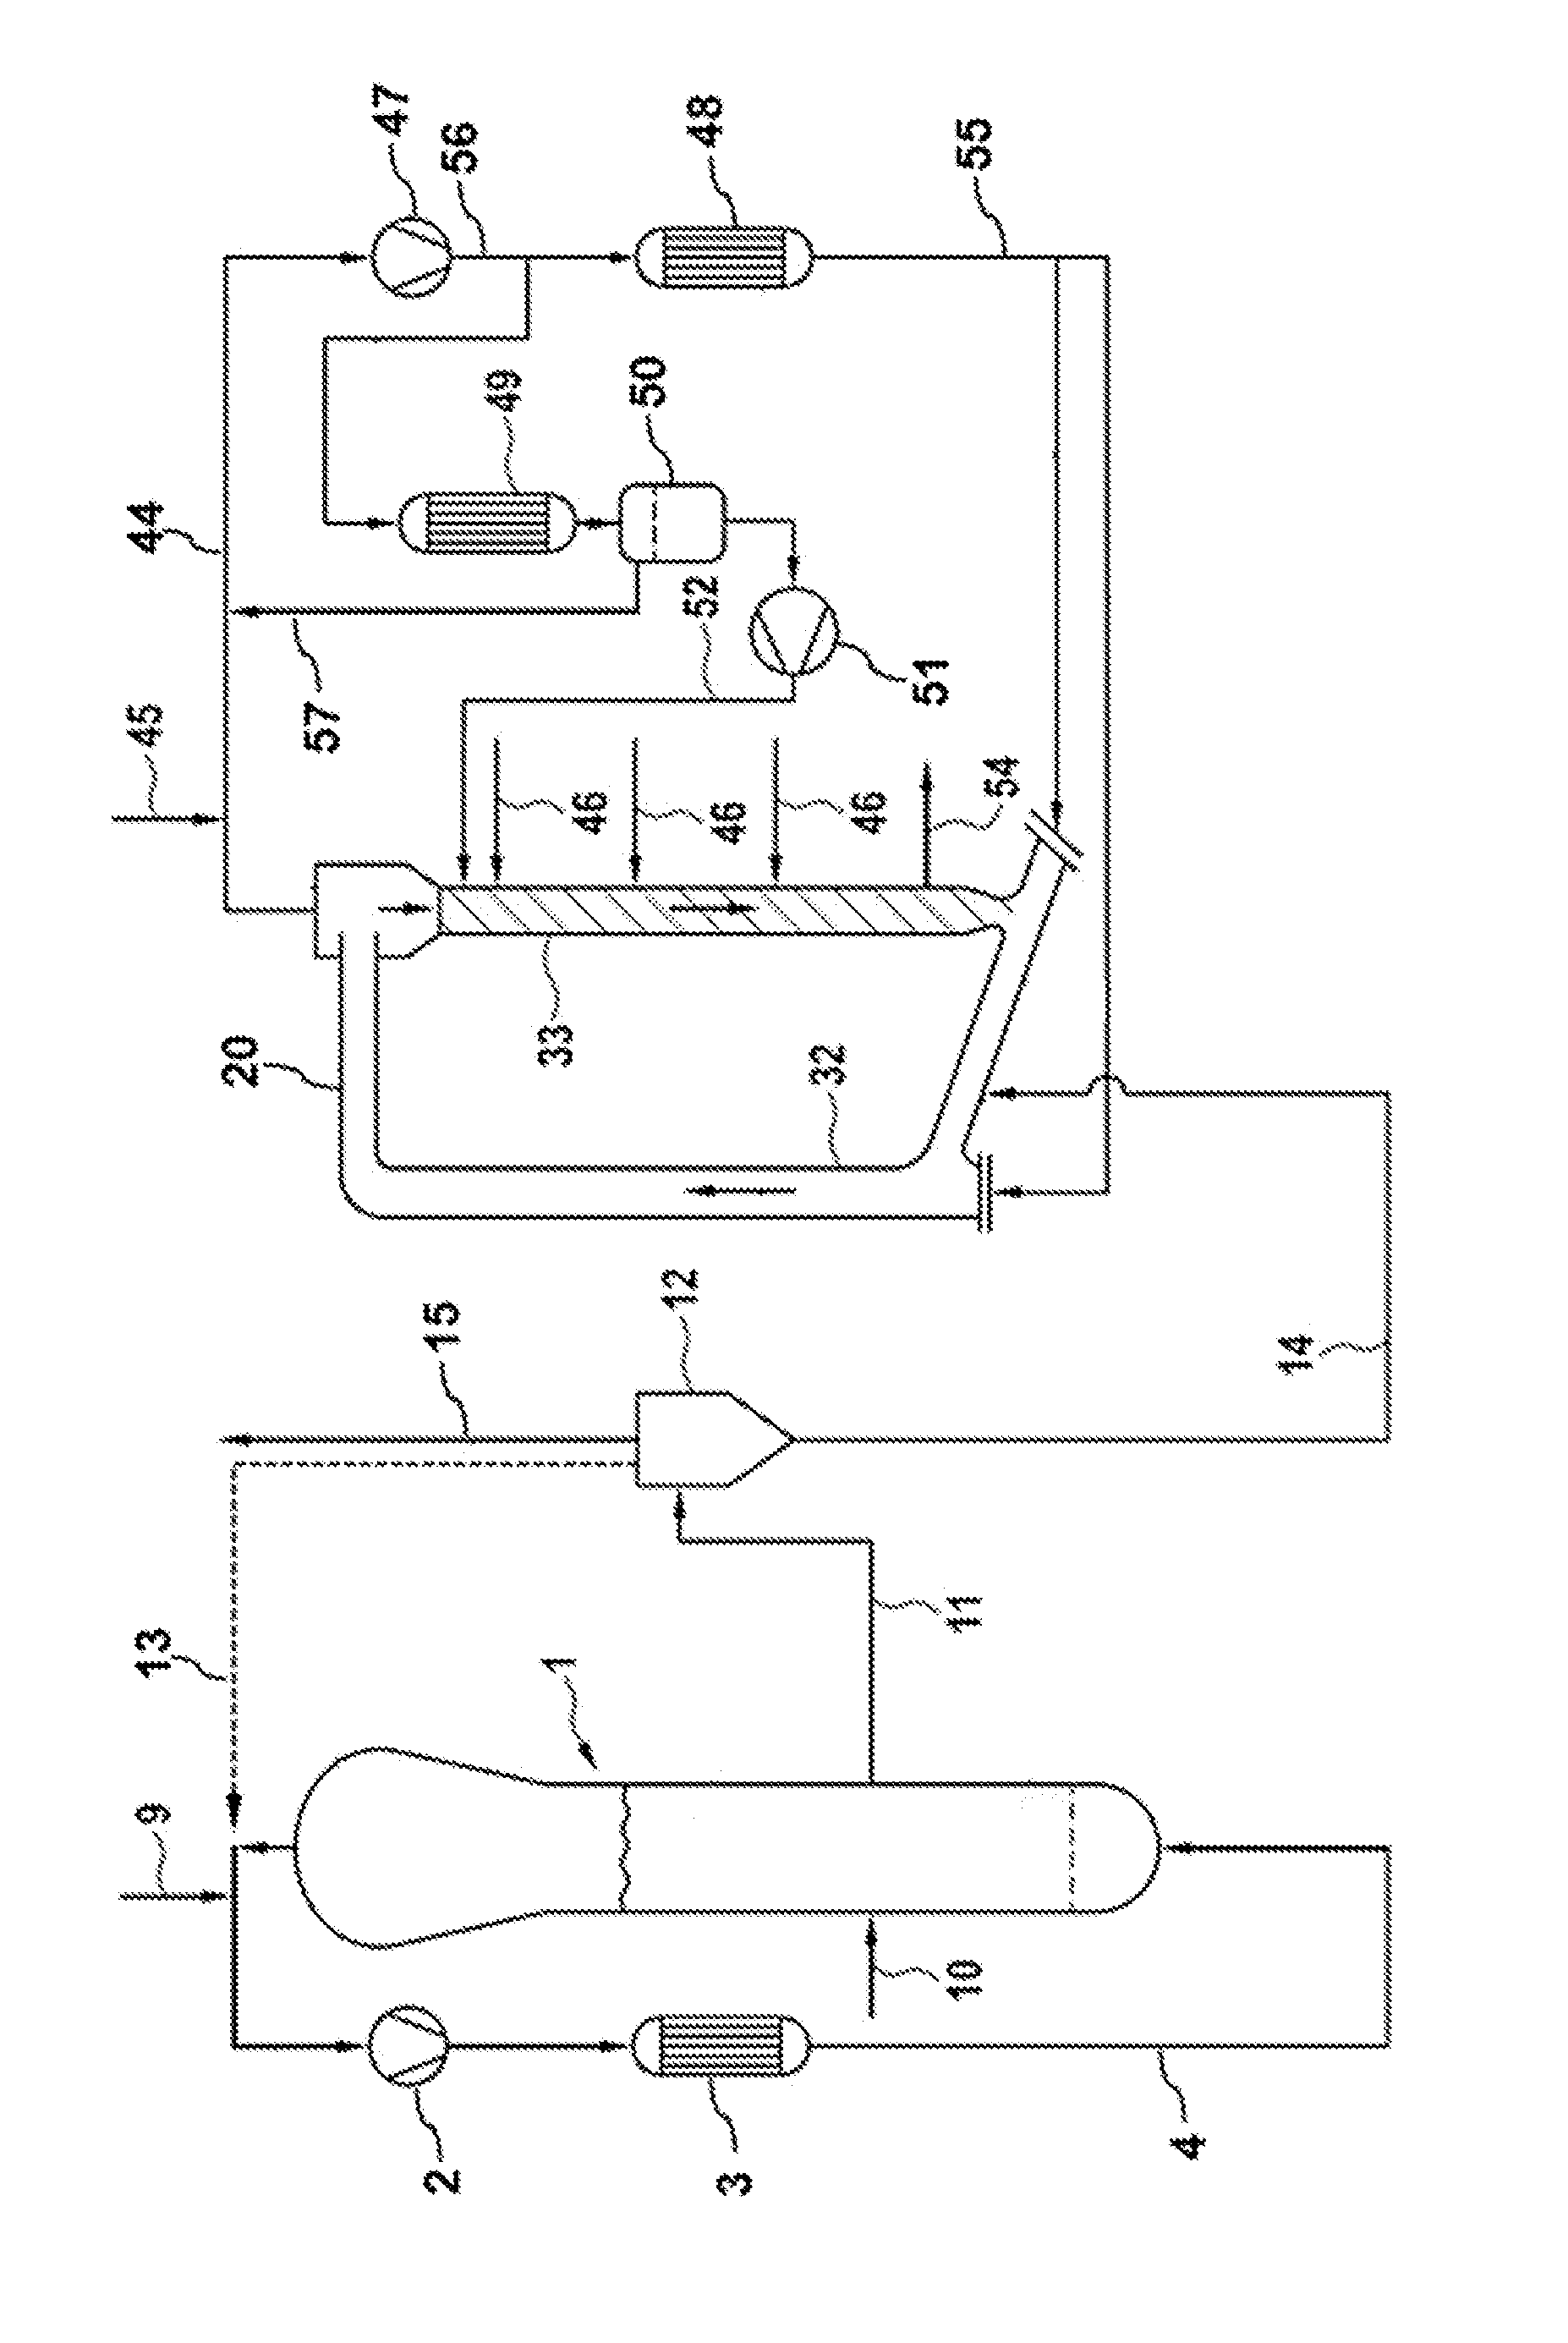 Polyethylene processes and compositions thereof